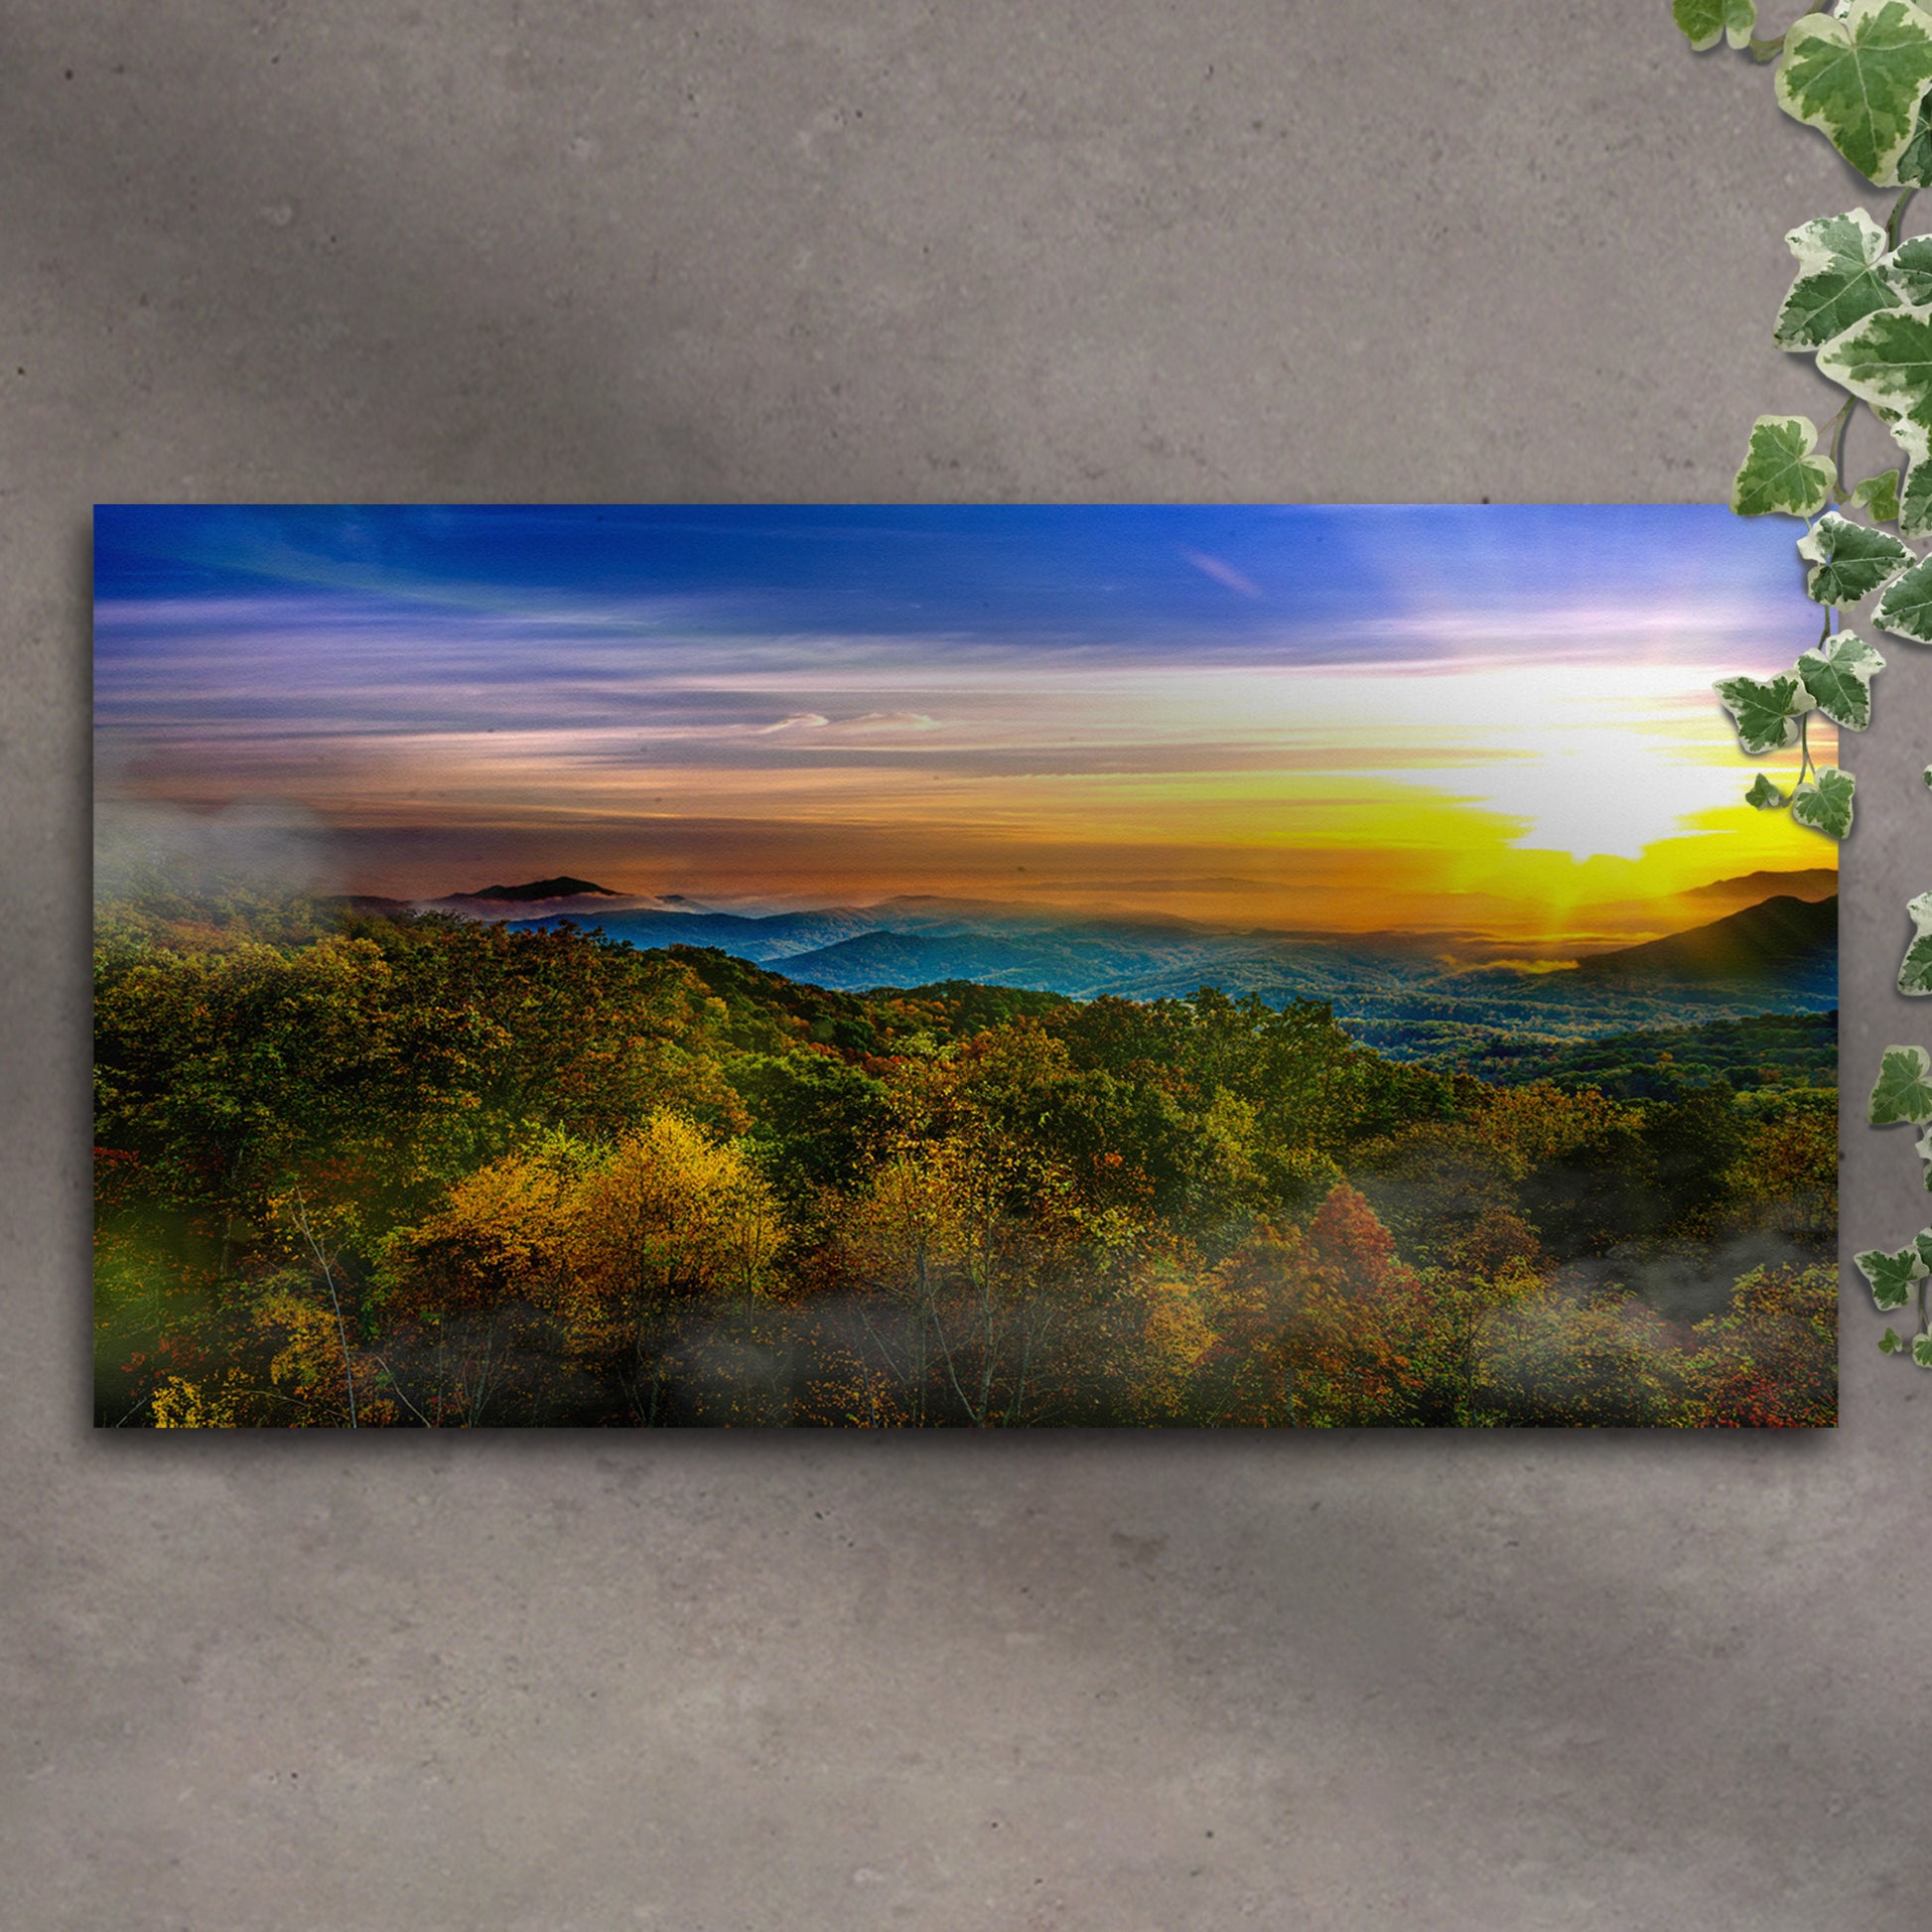 Foggy Mountain At Sunrise Canvas Wall Art - Image by Tailored Canvases